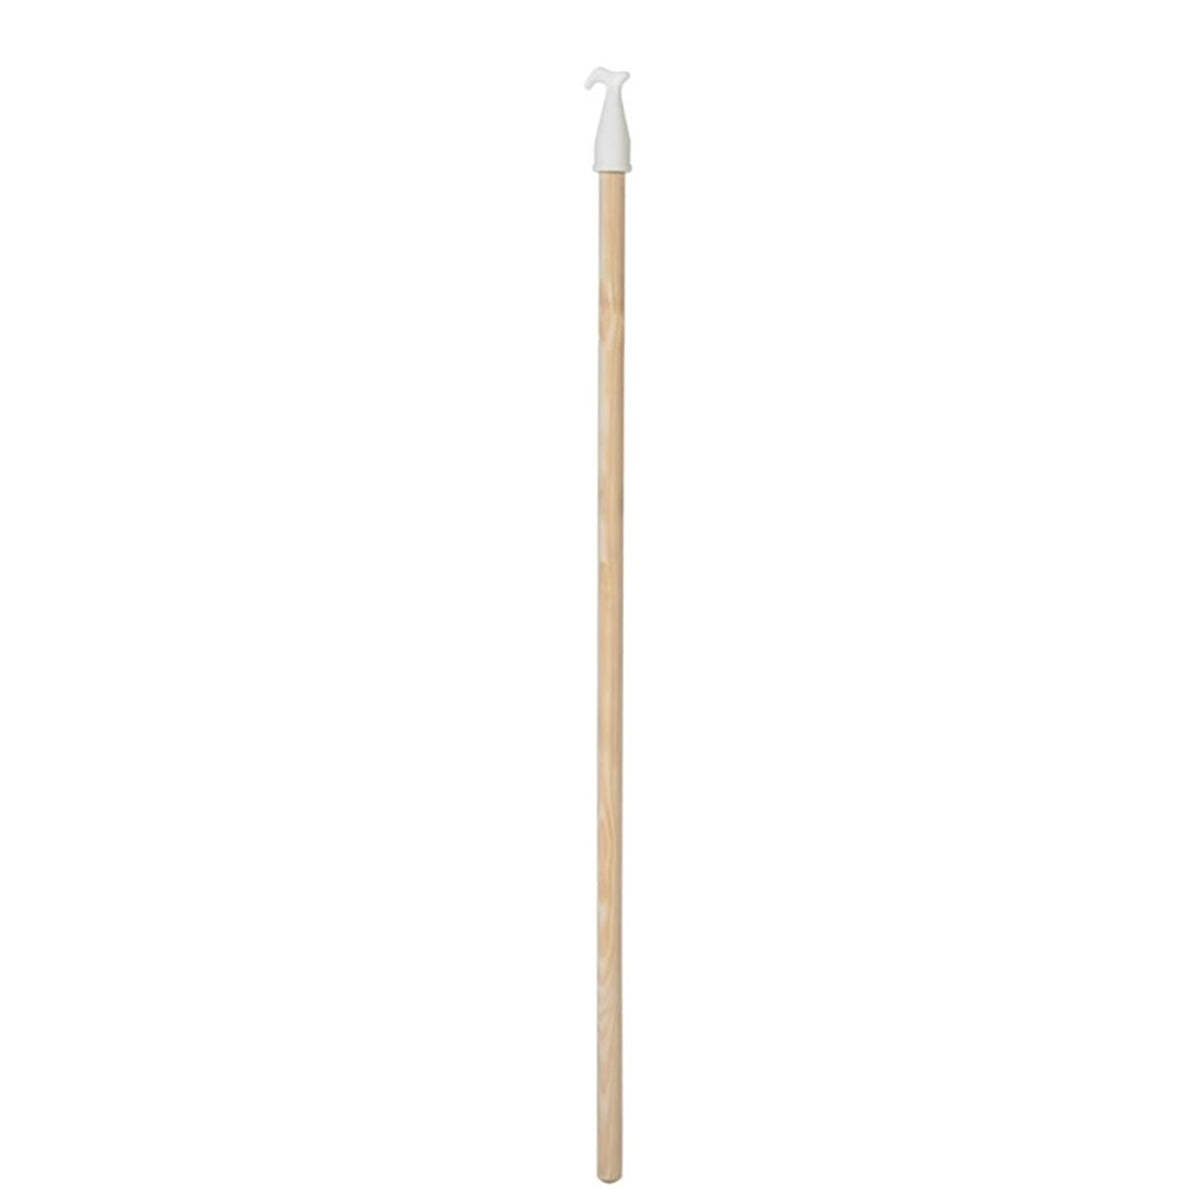 Oman Wooden Rod with Plastic Clip - 29 in.